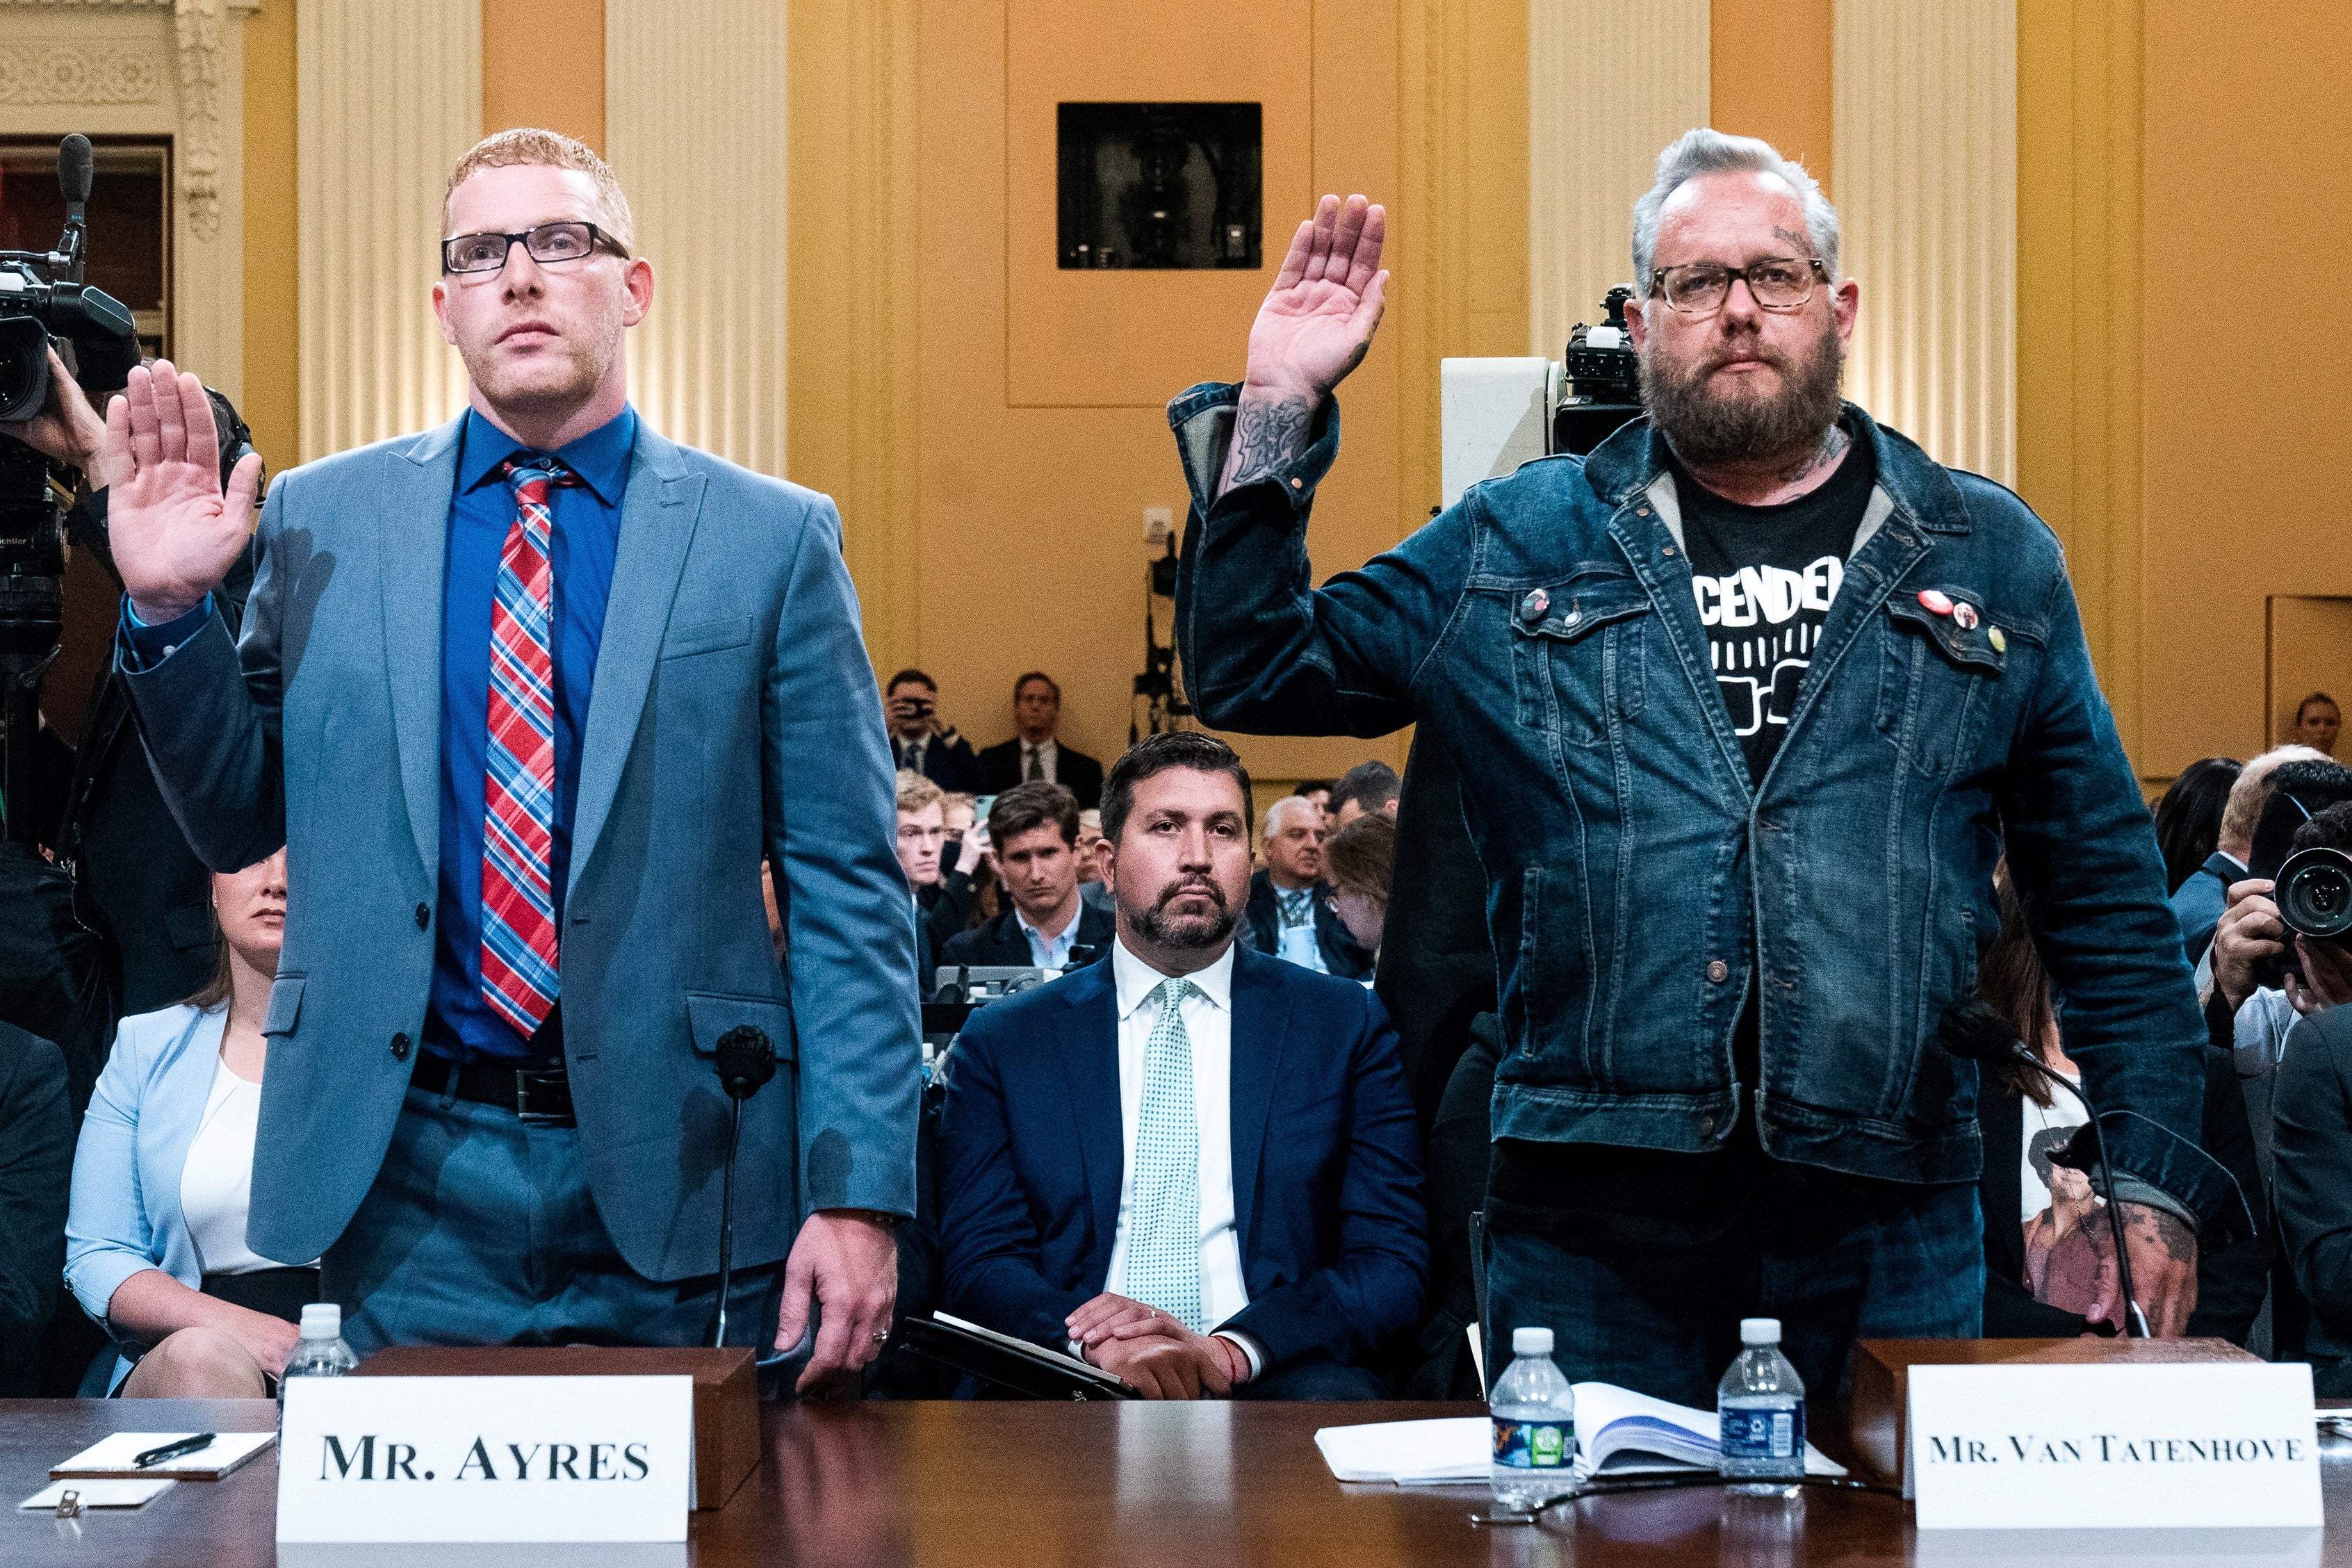 Stephen Ayres, a participant in the January 6 attack on the Capitol, and Jason Van Tatenhove, a former spokesperson for the Oath Keepers, testified in the House Jan. 6 hearing on July 12.